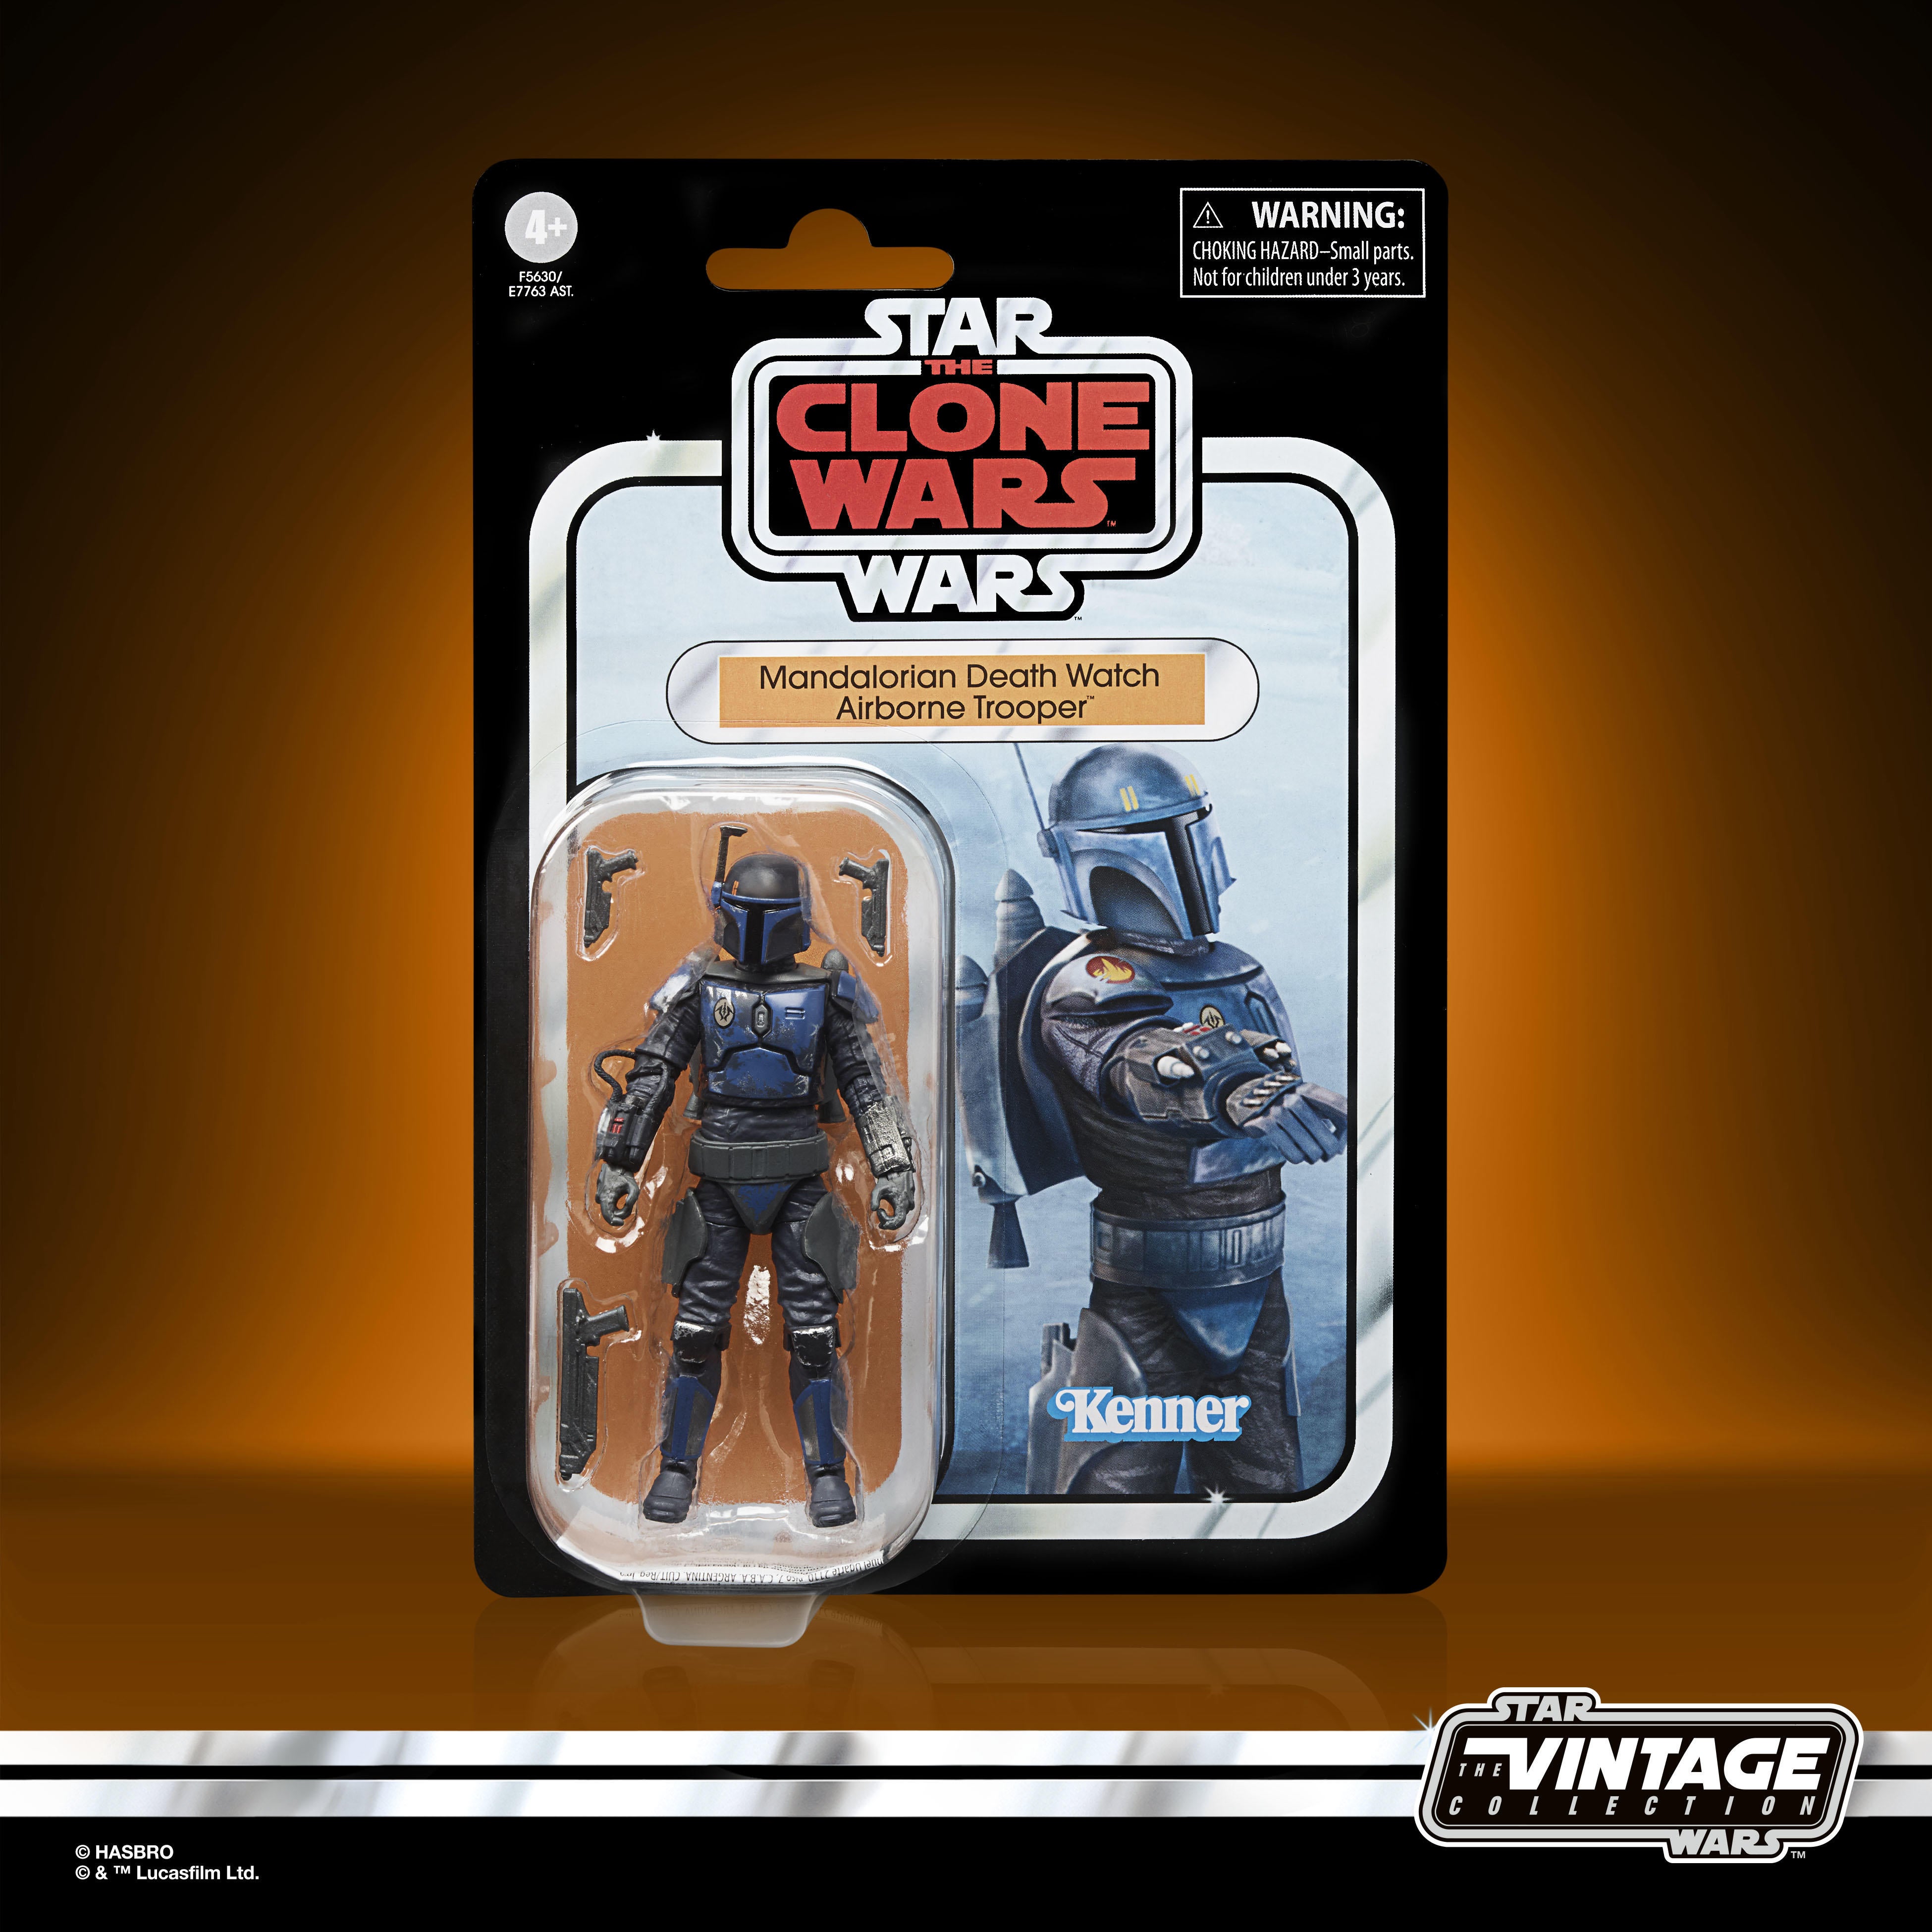 star-wars-the-vintage-collection-3-75-inch-mandalorian-death-watch-airborne-trooper-figure-package.jpg